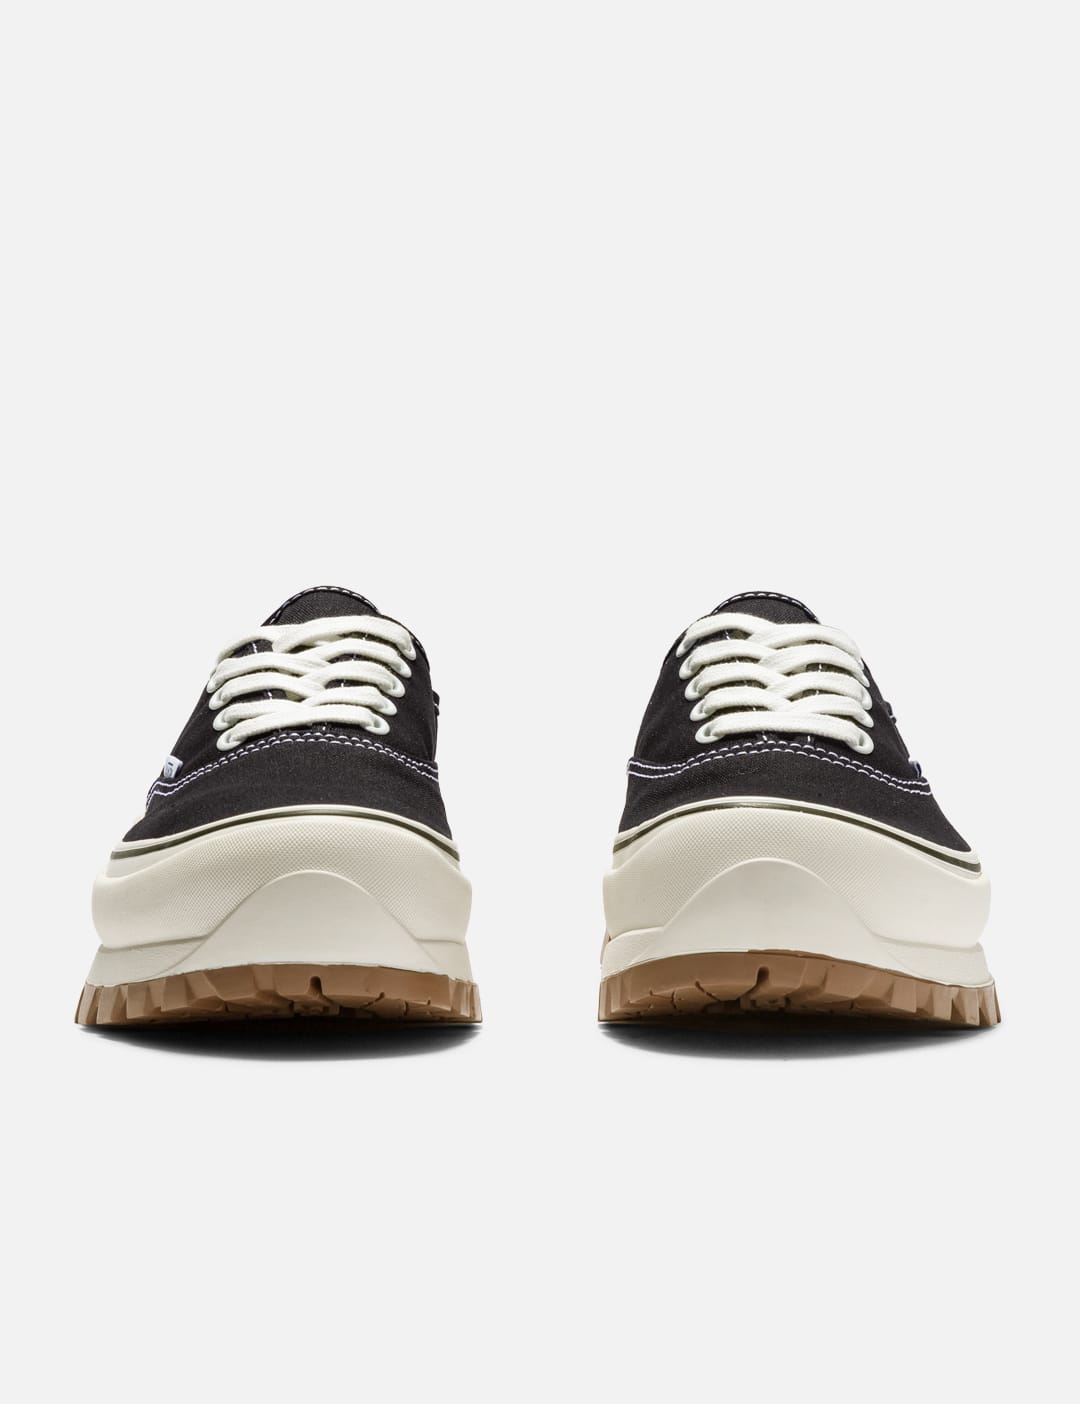 Vans - AUTHENTIC VIBRAM DX | HBX - Globally Curated Fashion and